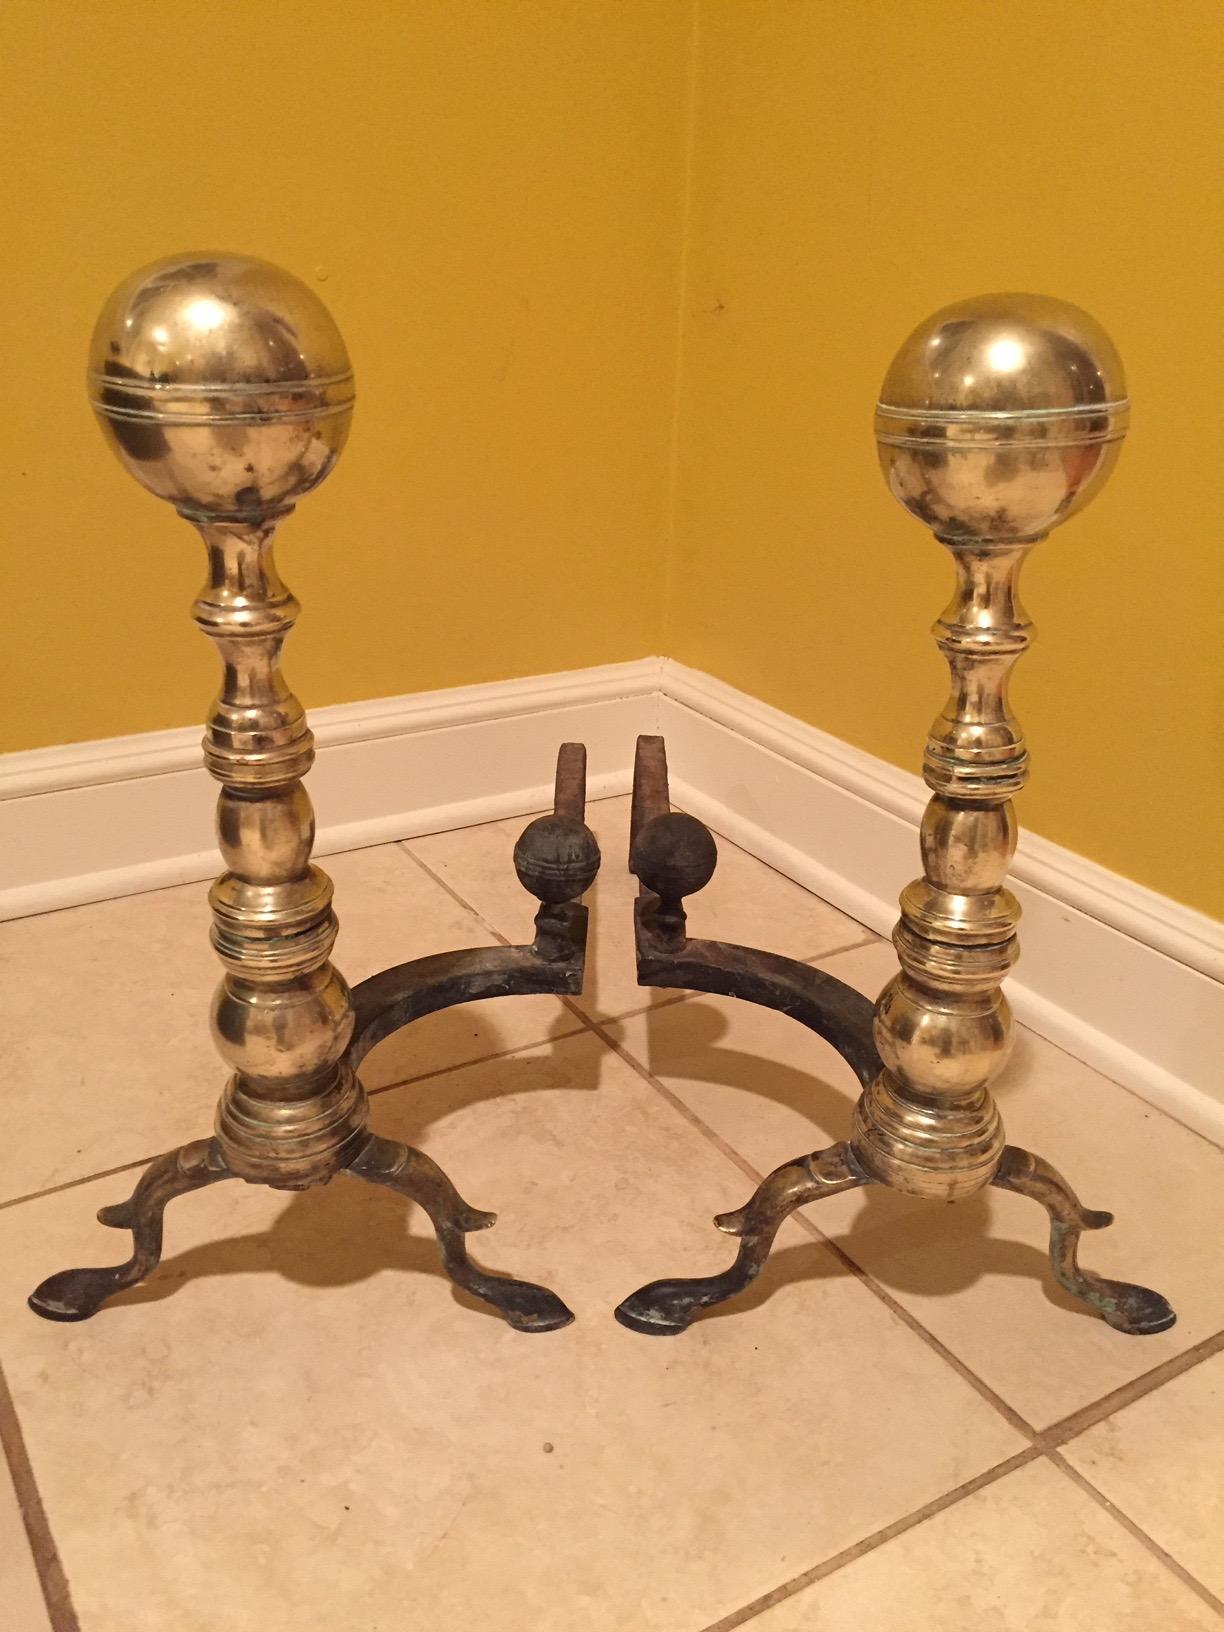 Classic chunky ball motif solid brass turn of the century andirons with a pair of handsome fireplace tools.

Measure: Fork:
32 1/2” H 
Tongs
31 1/2” H.